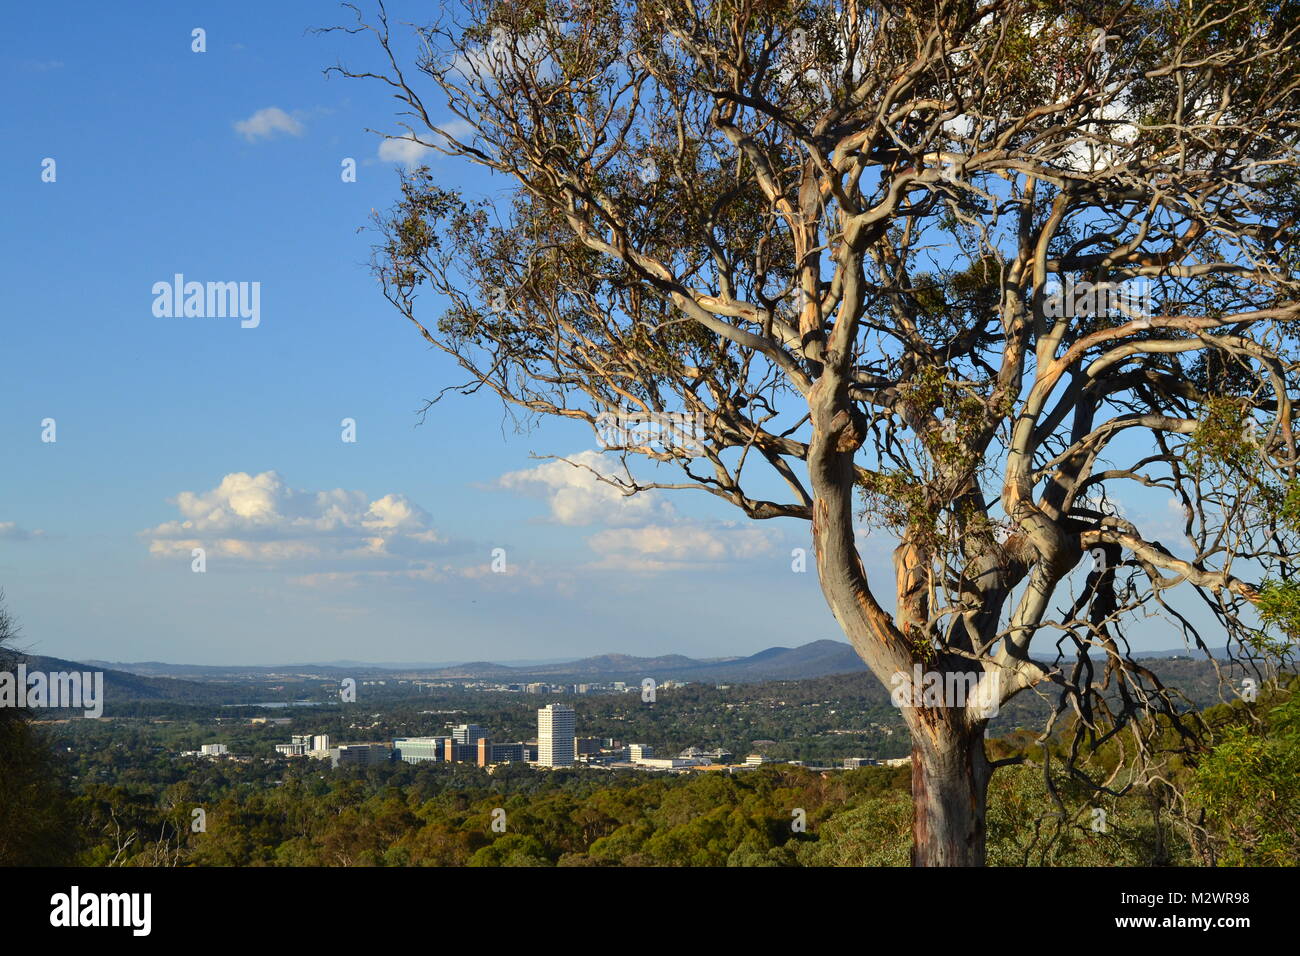 Gumtree in the foreground with a city and hills in the background. Stock Photo